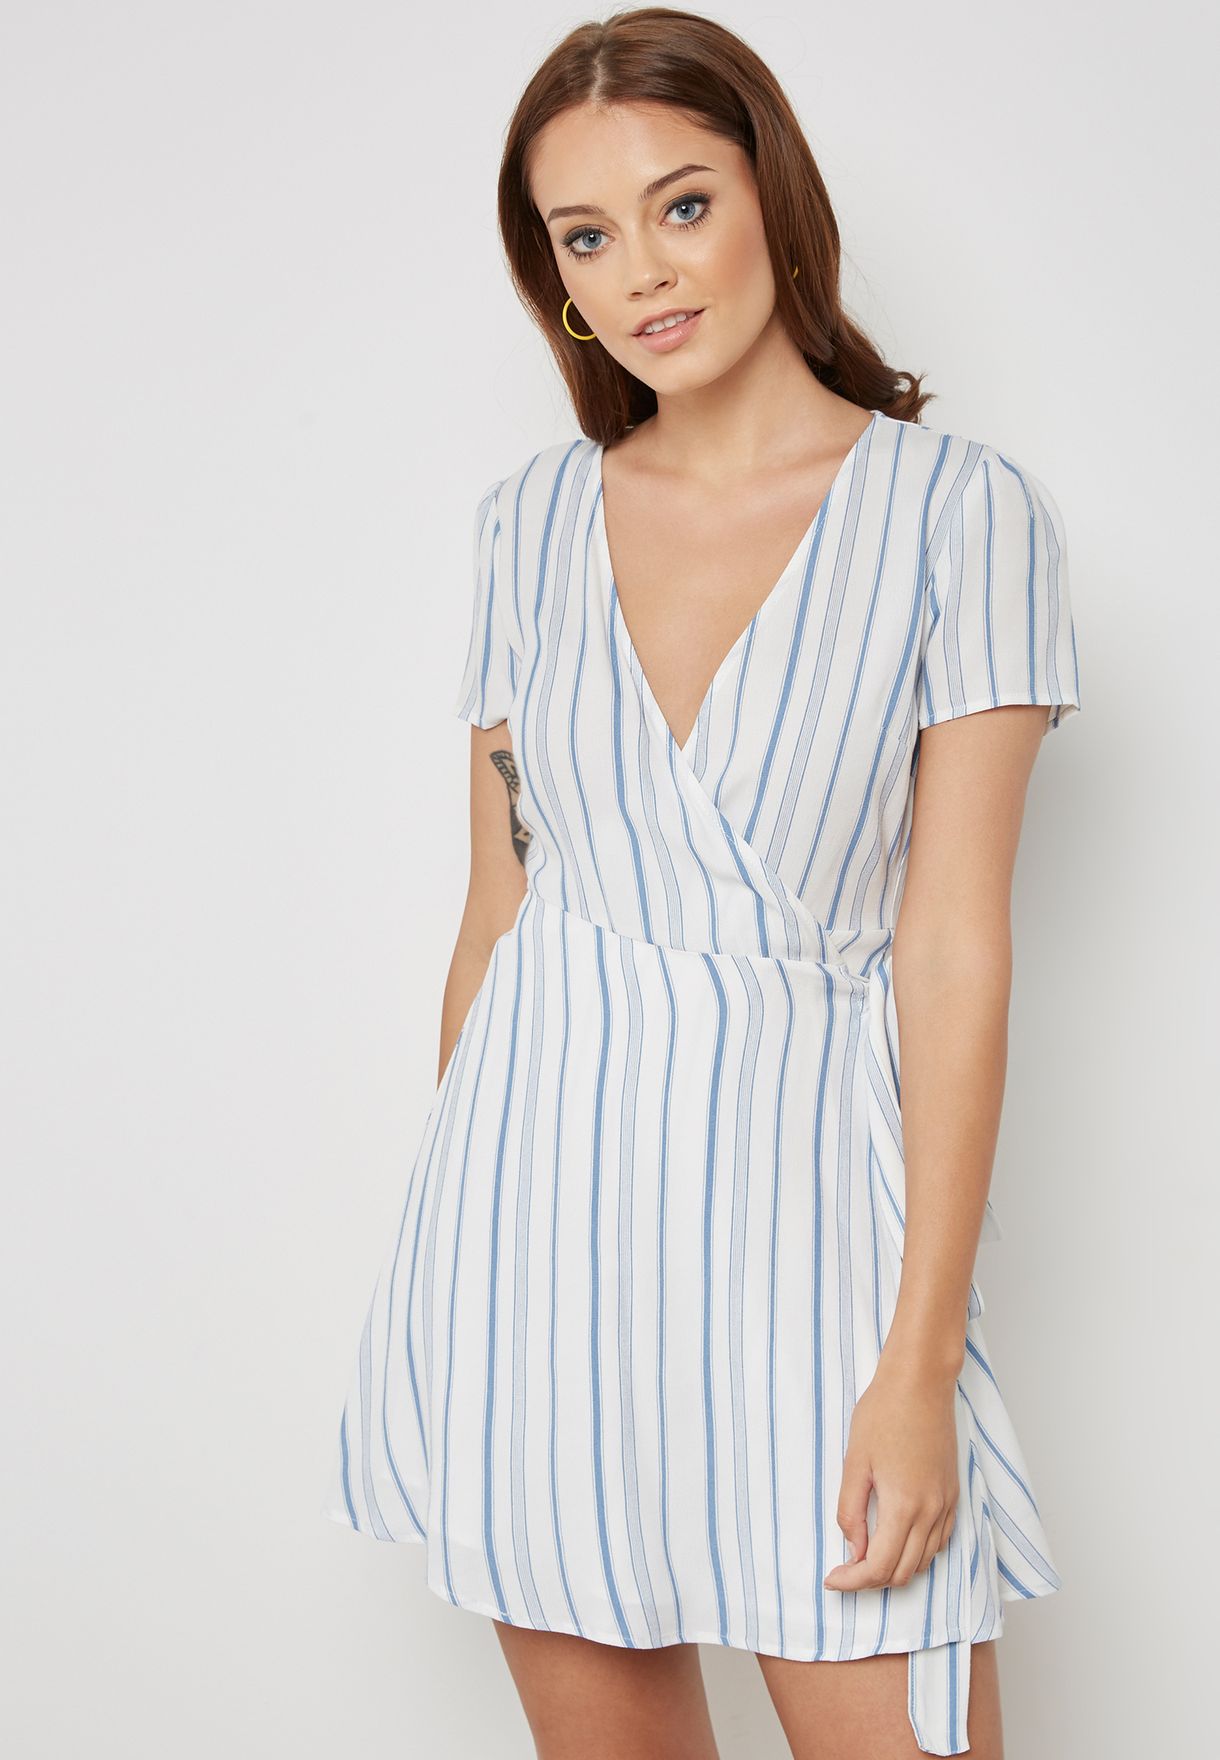 forever 21 blue and white striped dress